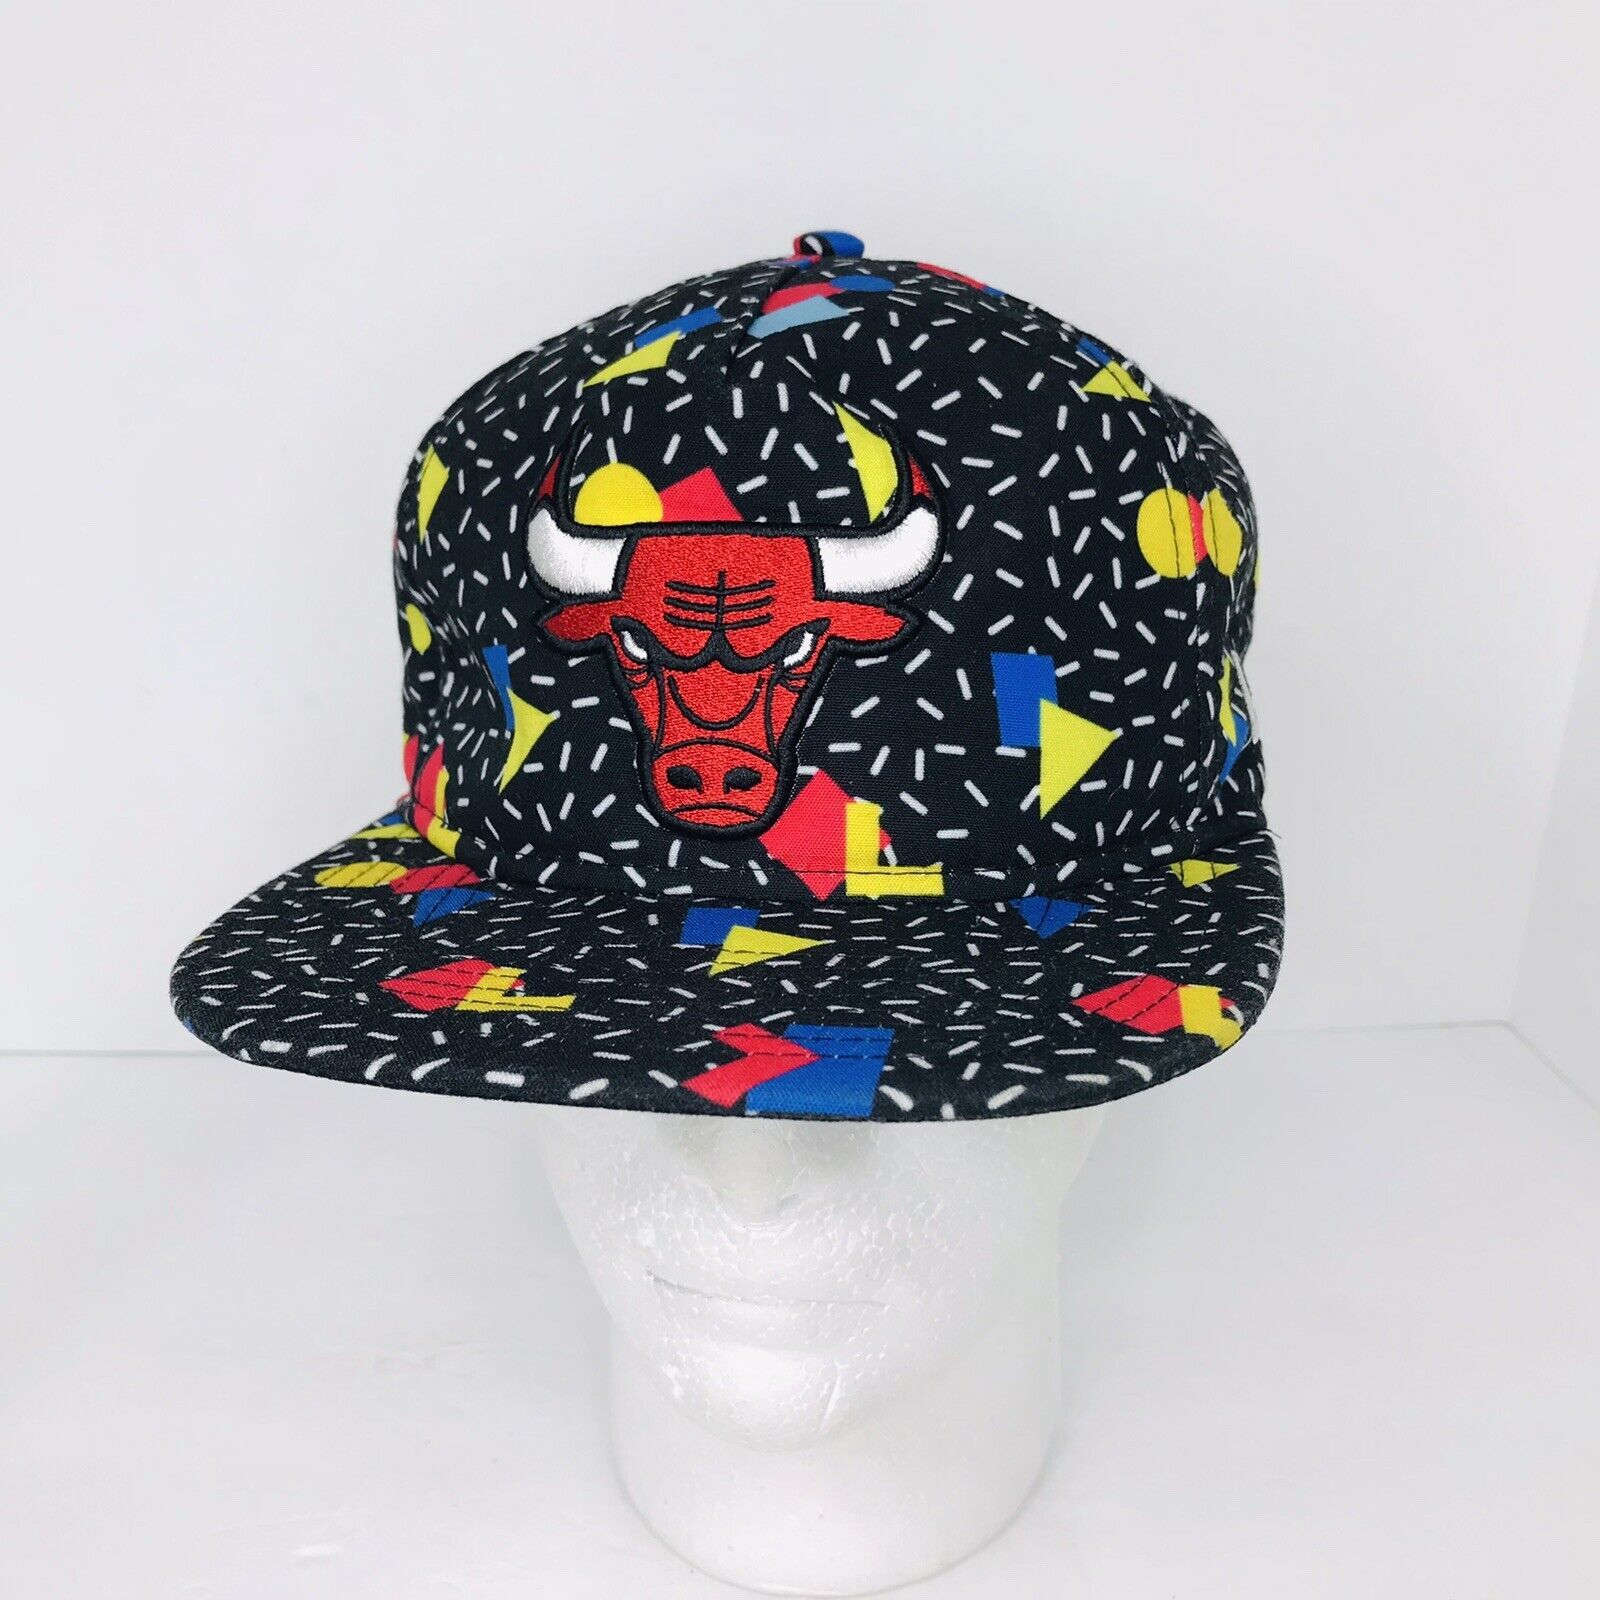 Primary image for Chicago Bulls New Era 9FIFTY All Over Print NBA Colab Basketball Snapback Hat